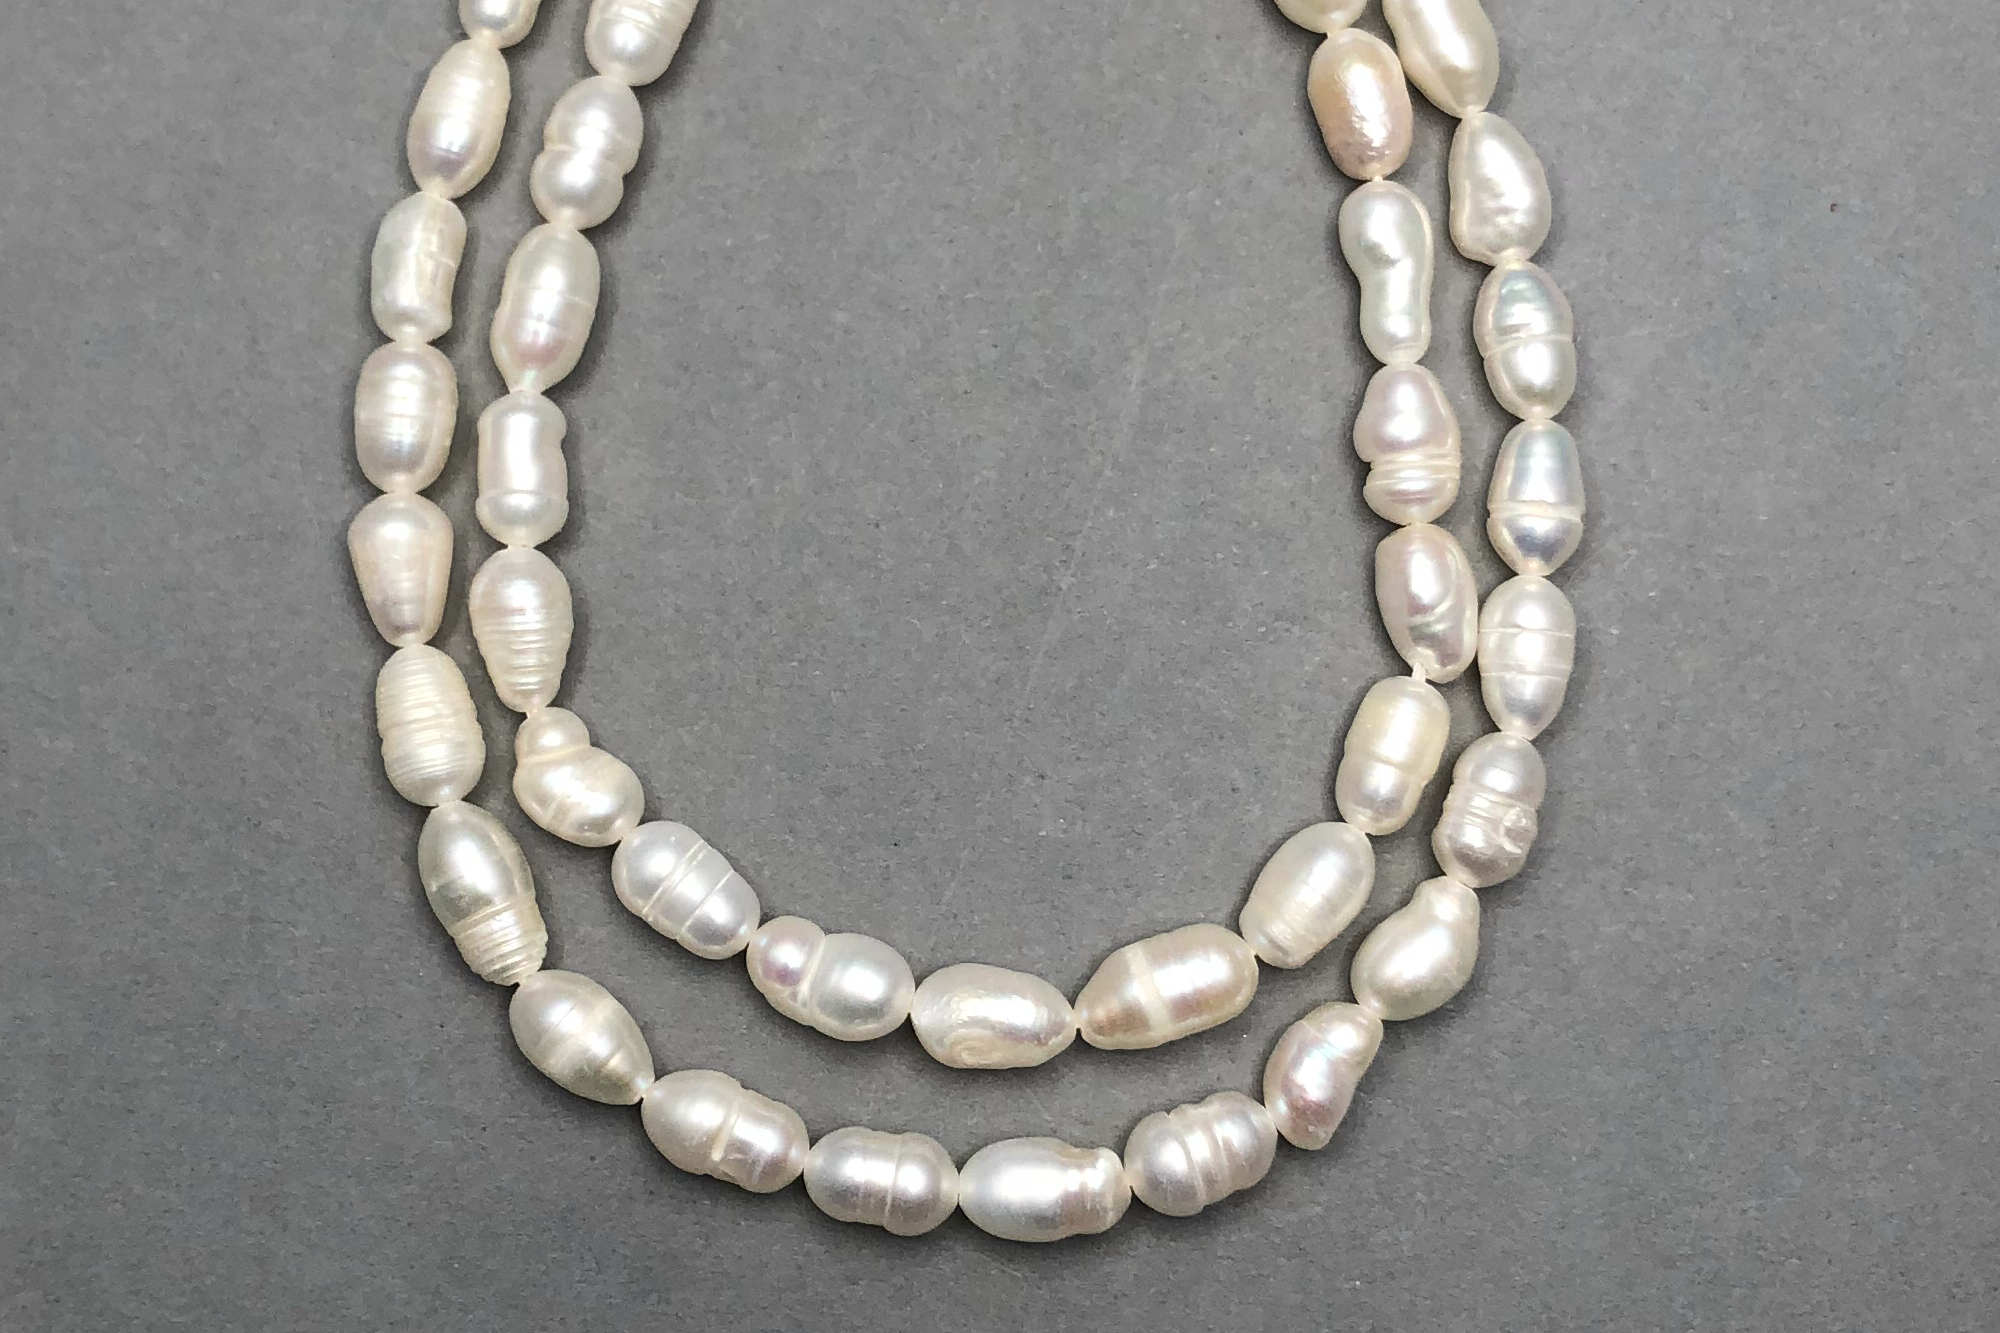 Natural Ivory Fresh Water Pearls, 17cm Strand, Circled/Elongated approx. 7x5mm